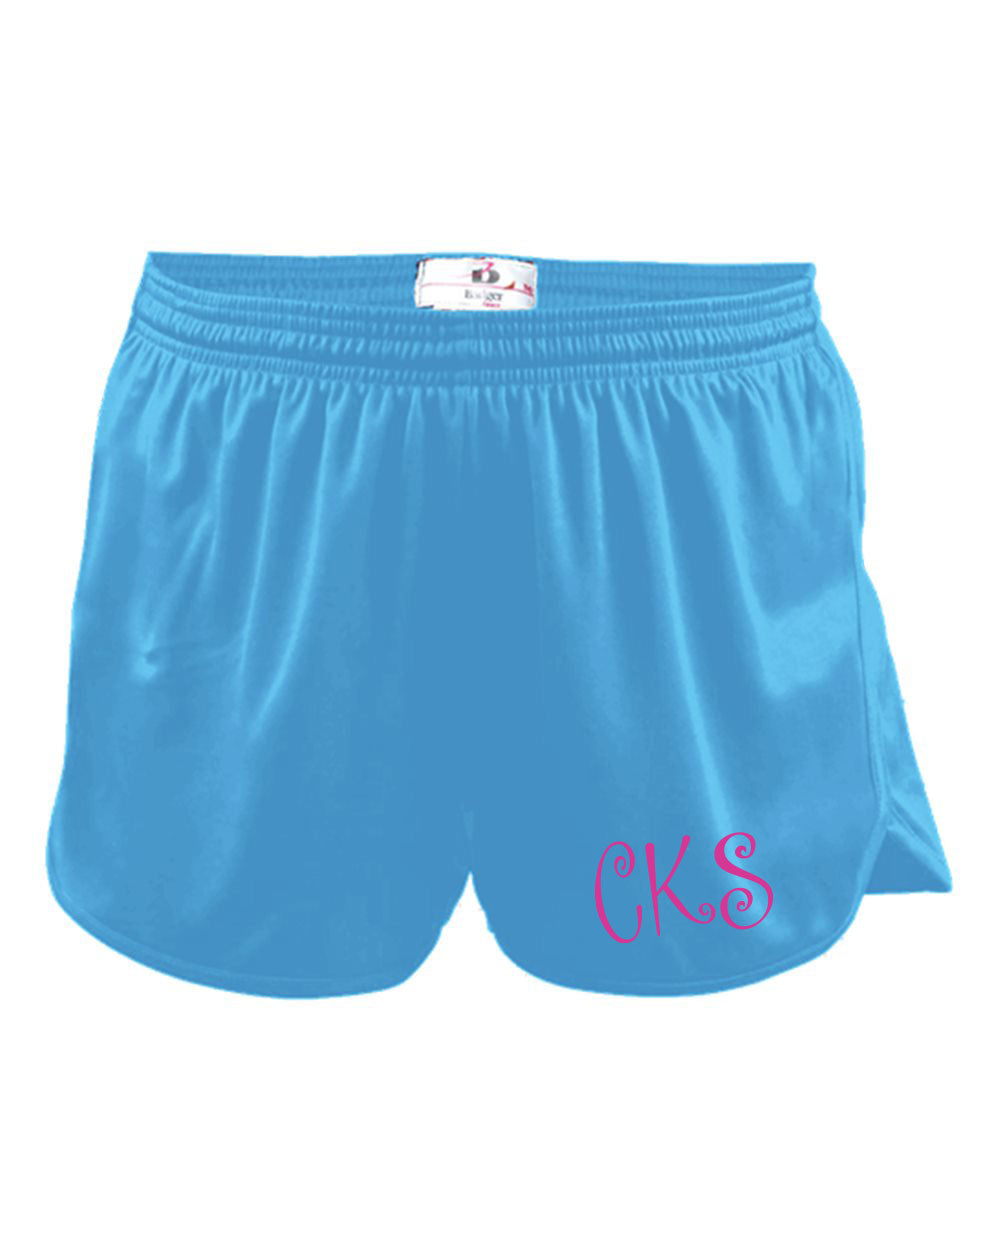 Girls Youth Track Shorts XS ONLY! 3 COLORS